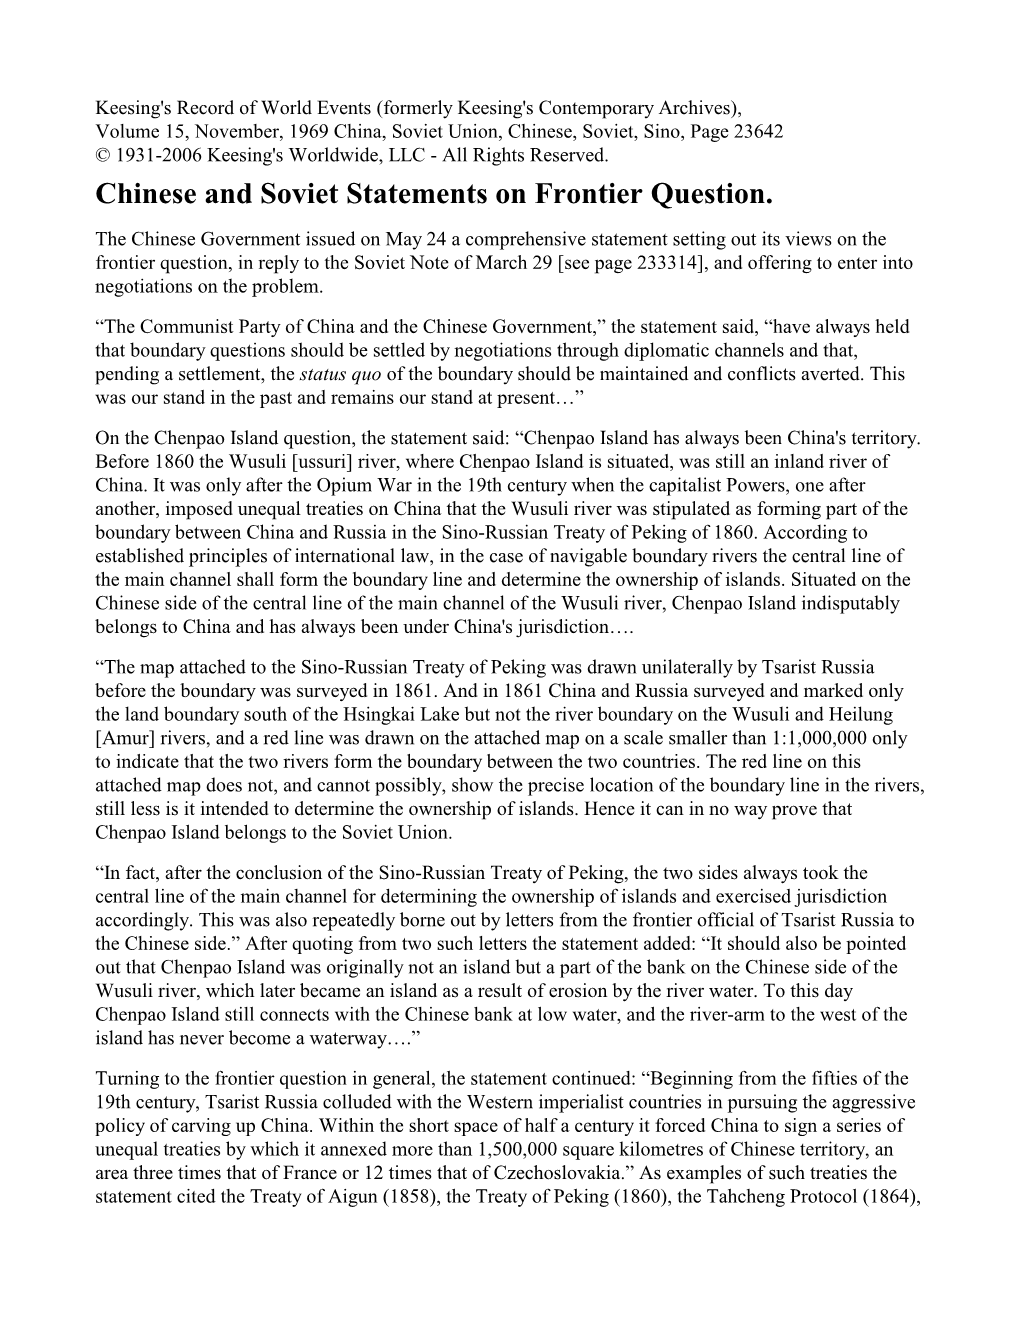 Chinese and Soviet Statements on Frontier Question